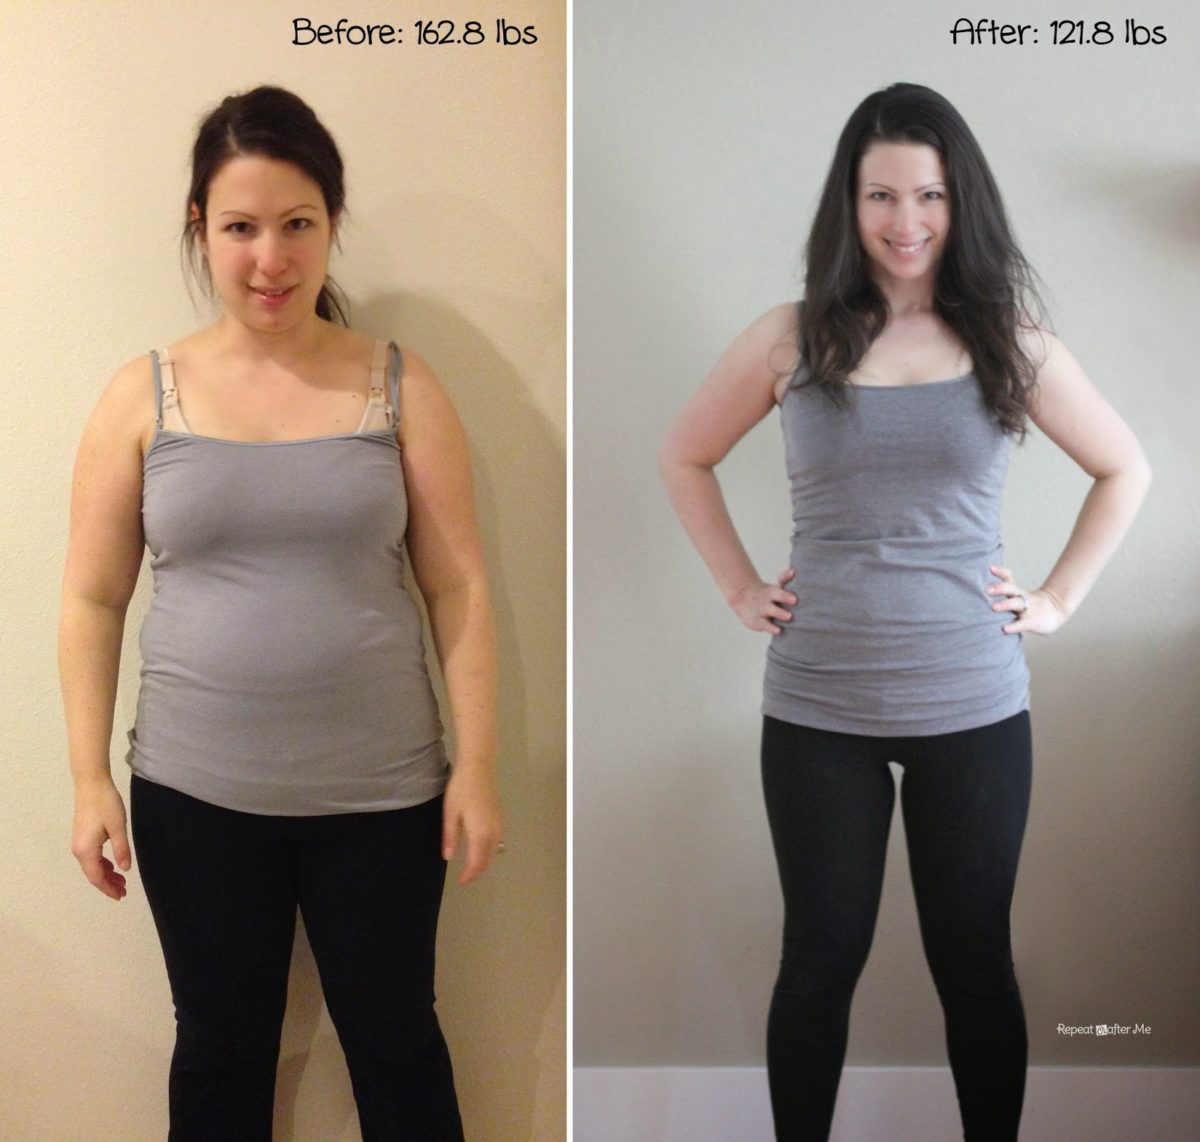 My Weight Watchers Success Story - Repeat Crafter Me